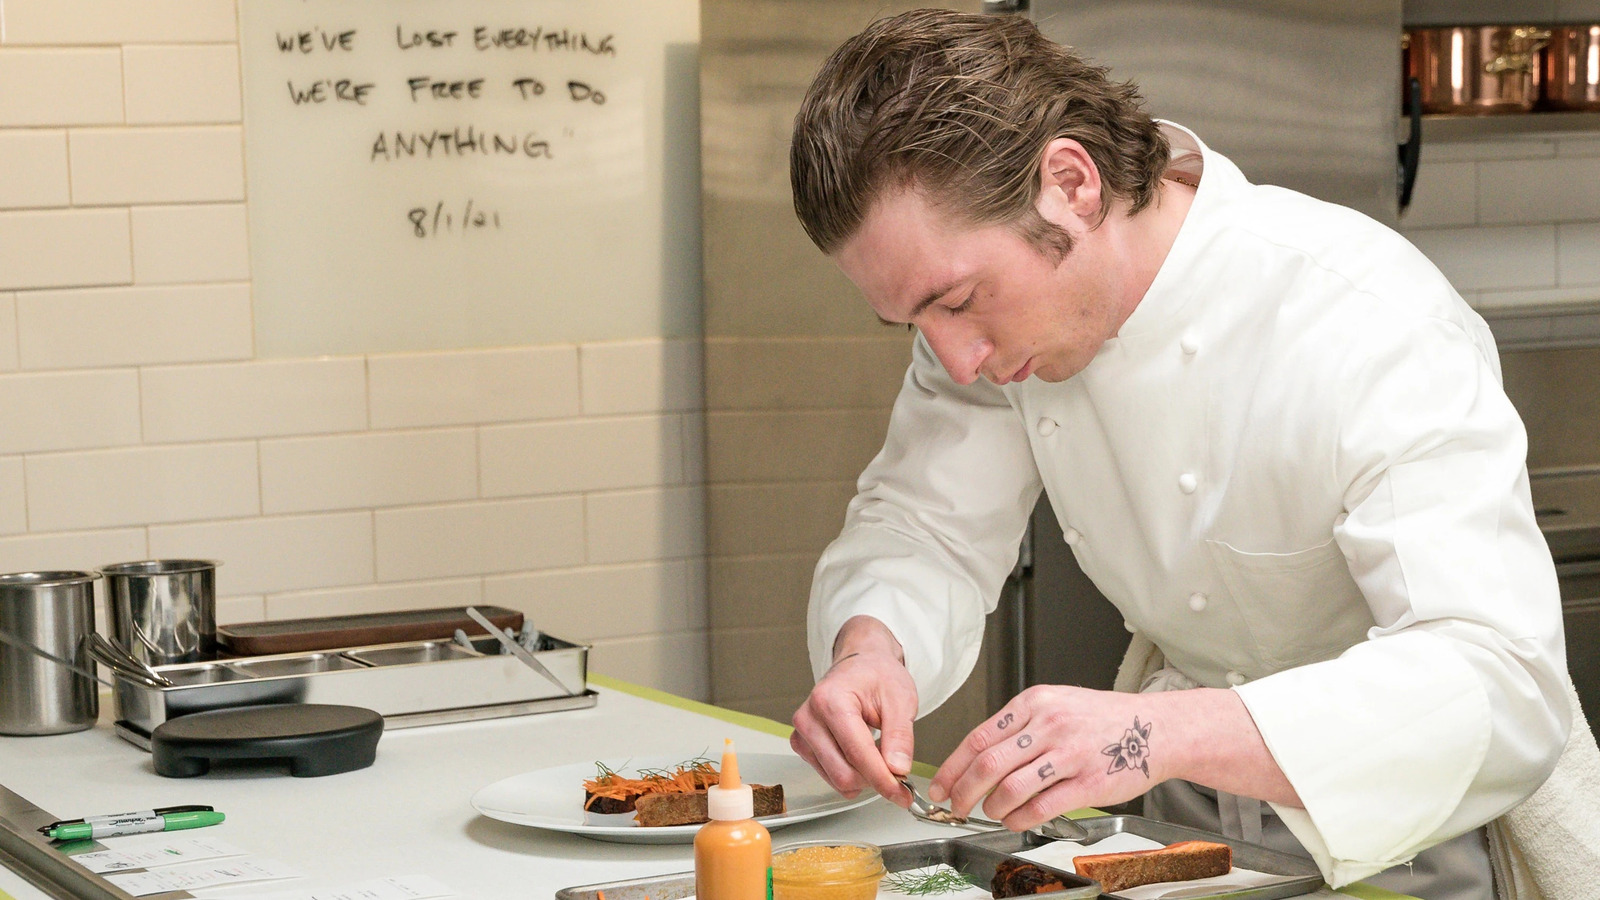 How Jeremy Allen White got his cooking experience preparing for the bear